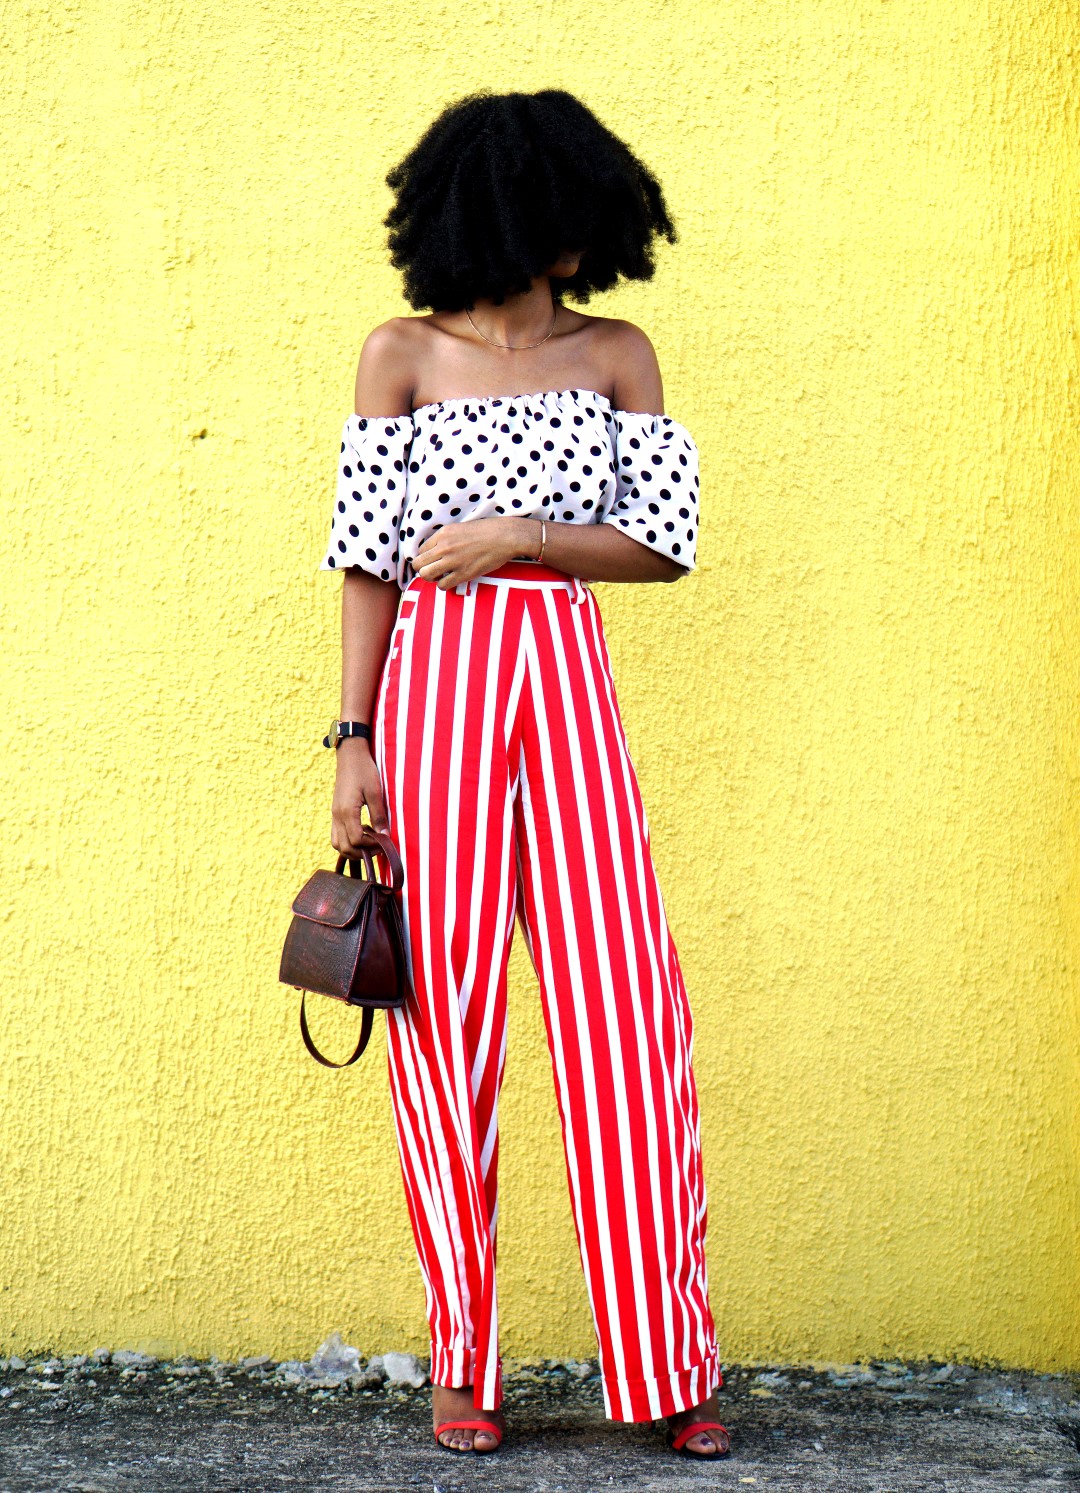 Mixed prints fashion trend : Nigerian blogger Cassie Daves In a polka dot off shoulder top and striped pants